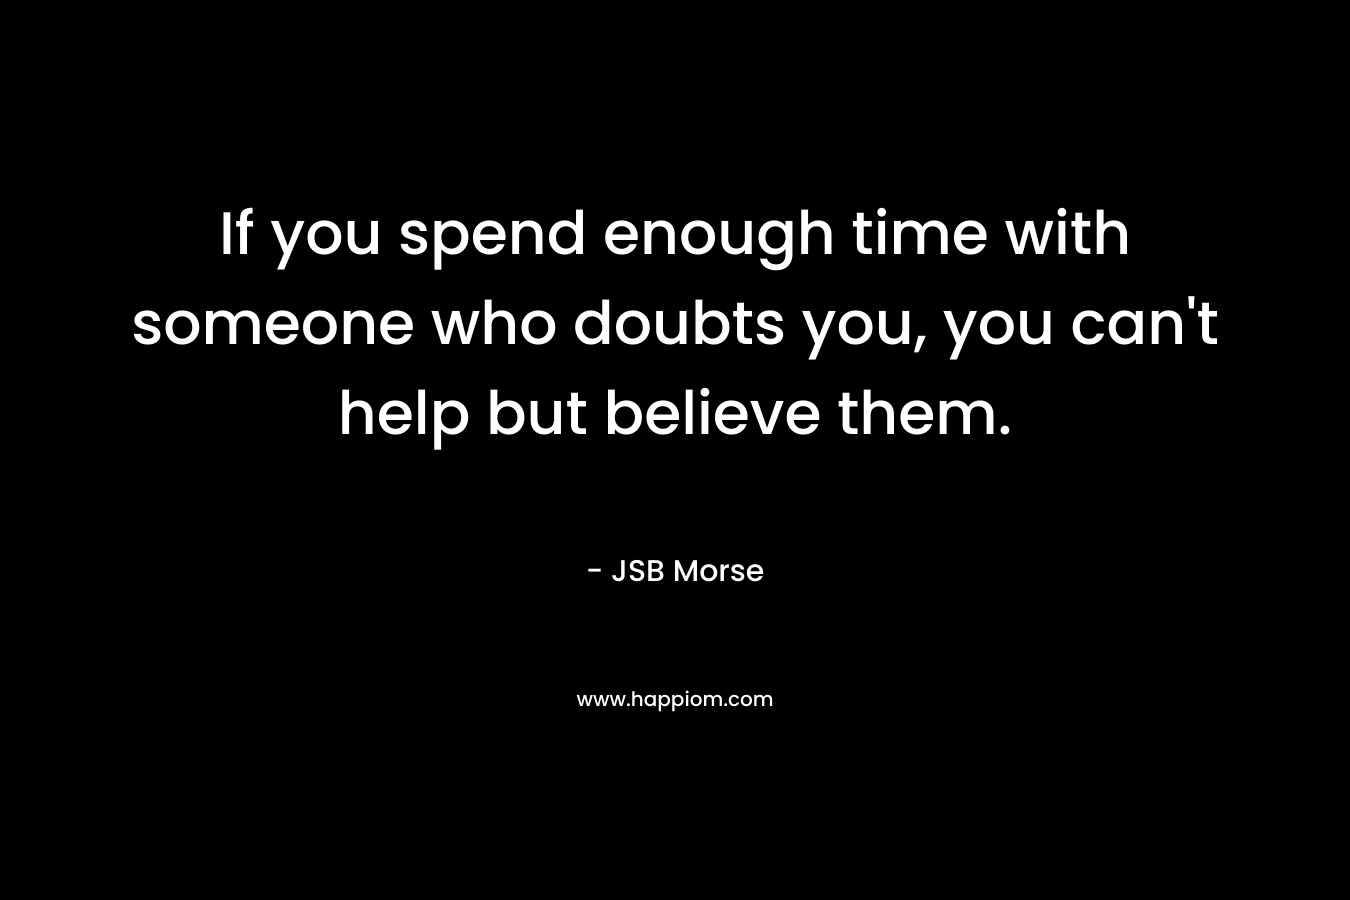 If you spend enough time with someone who doubts you, you can't help but believe them.